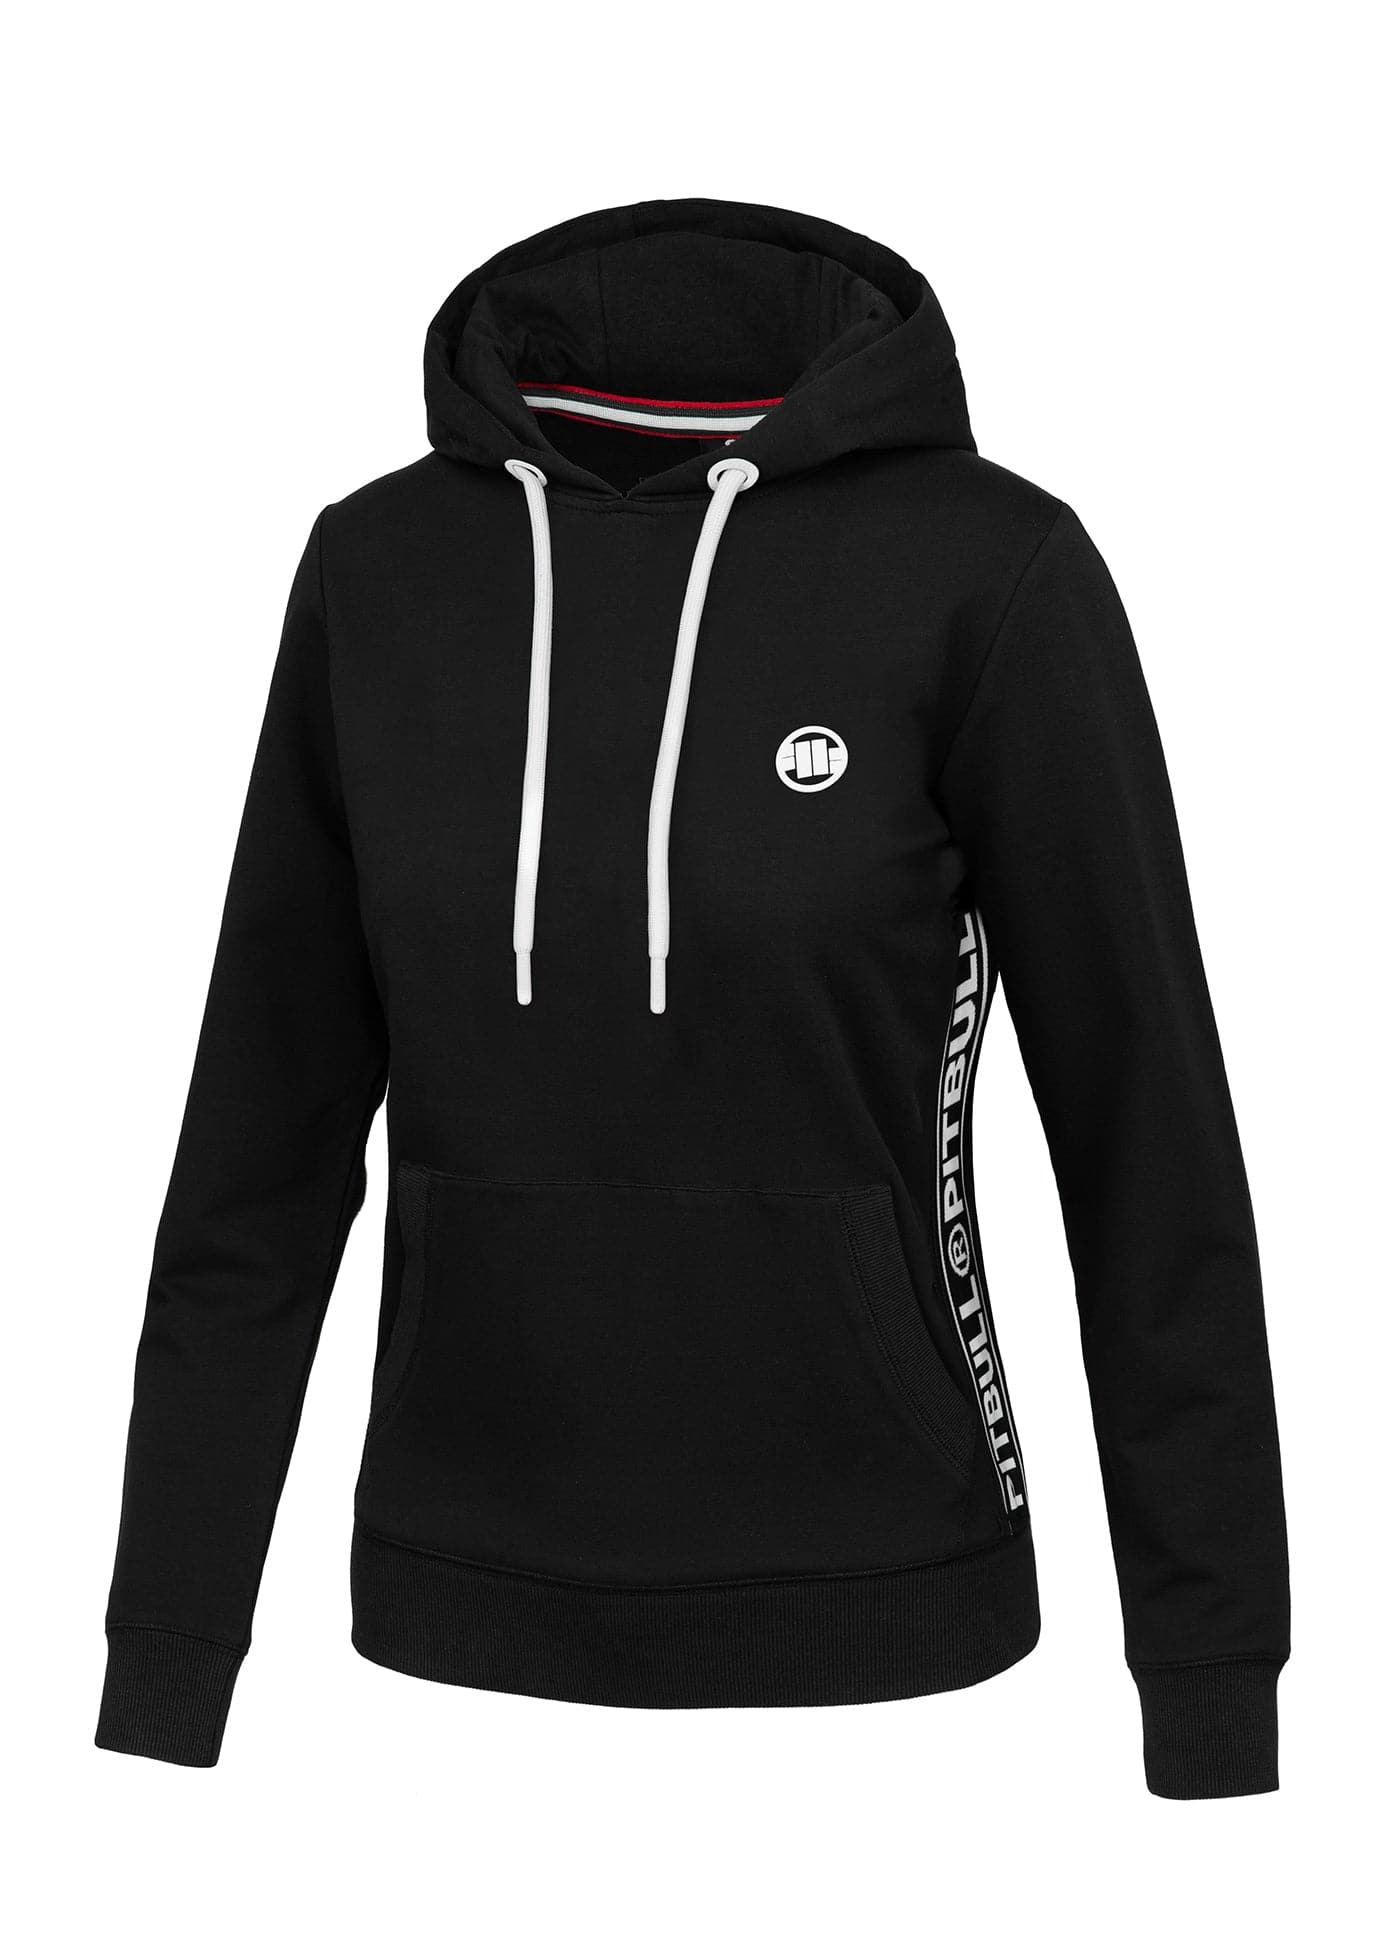 LA CANADA French Terry Black Hoodie